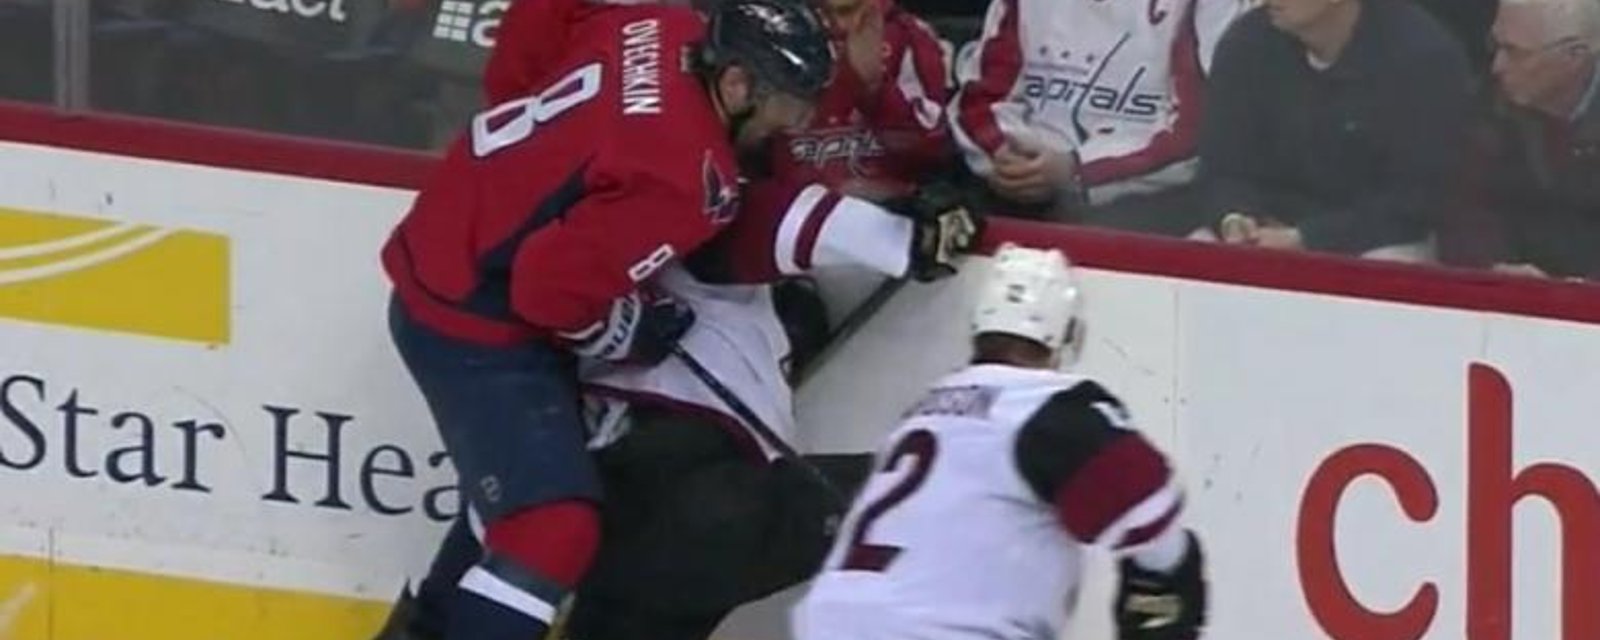 Ovechkin delivers a questionable hit from behind.